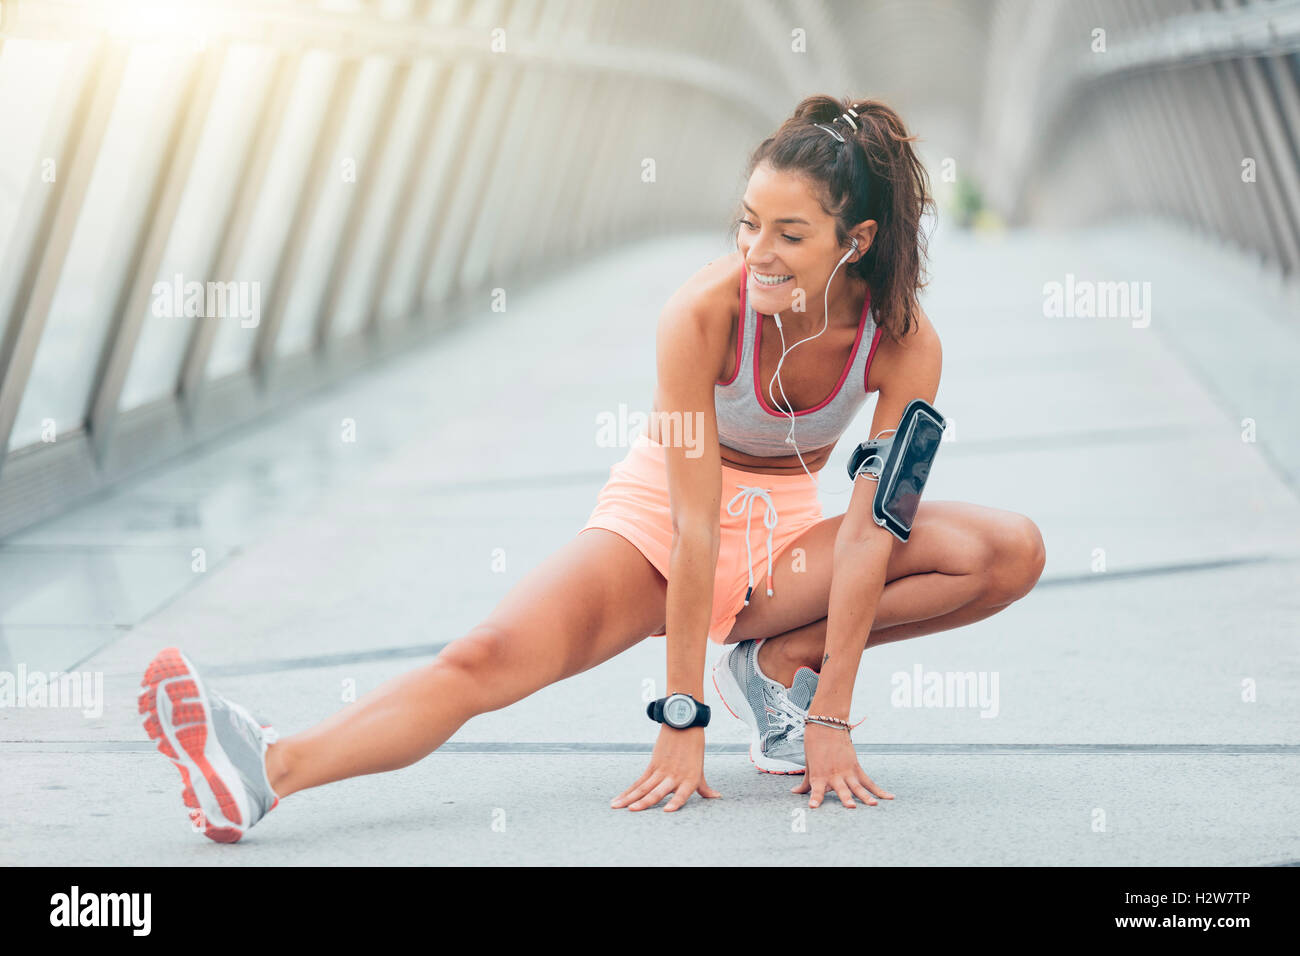 young fitness woman runner stretching legs before run Stock Photo